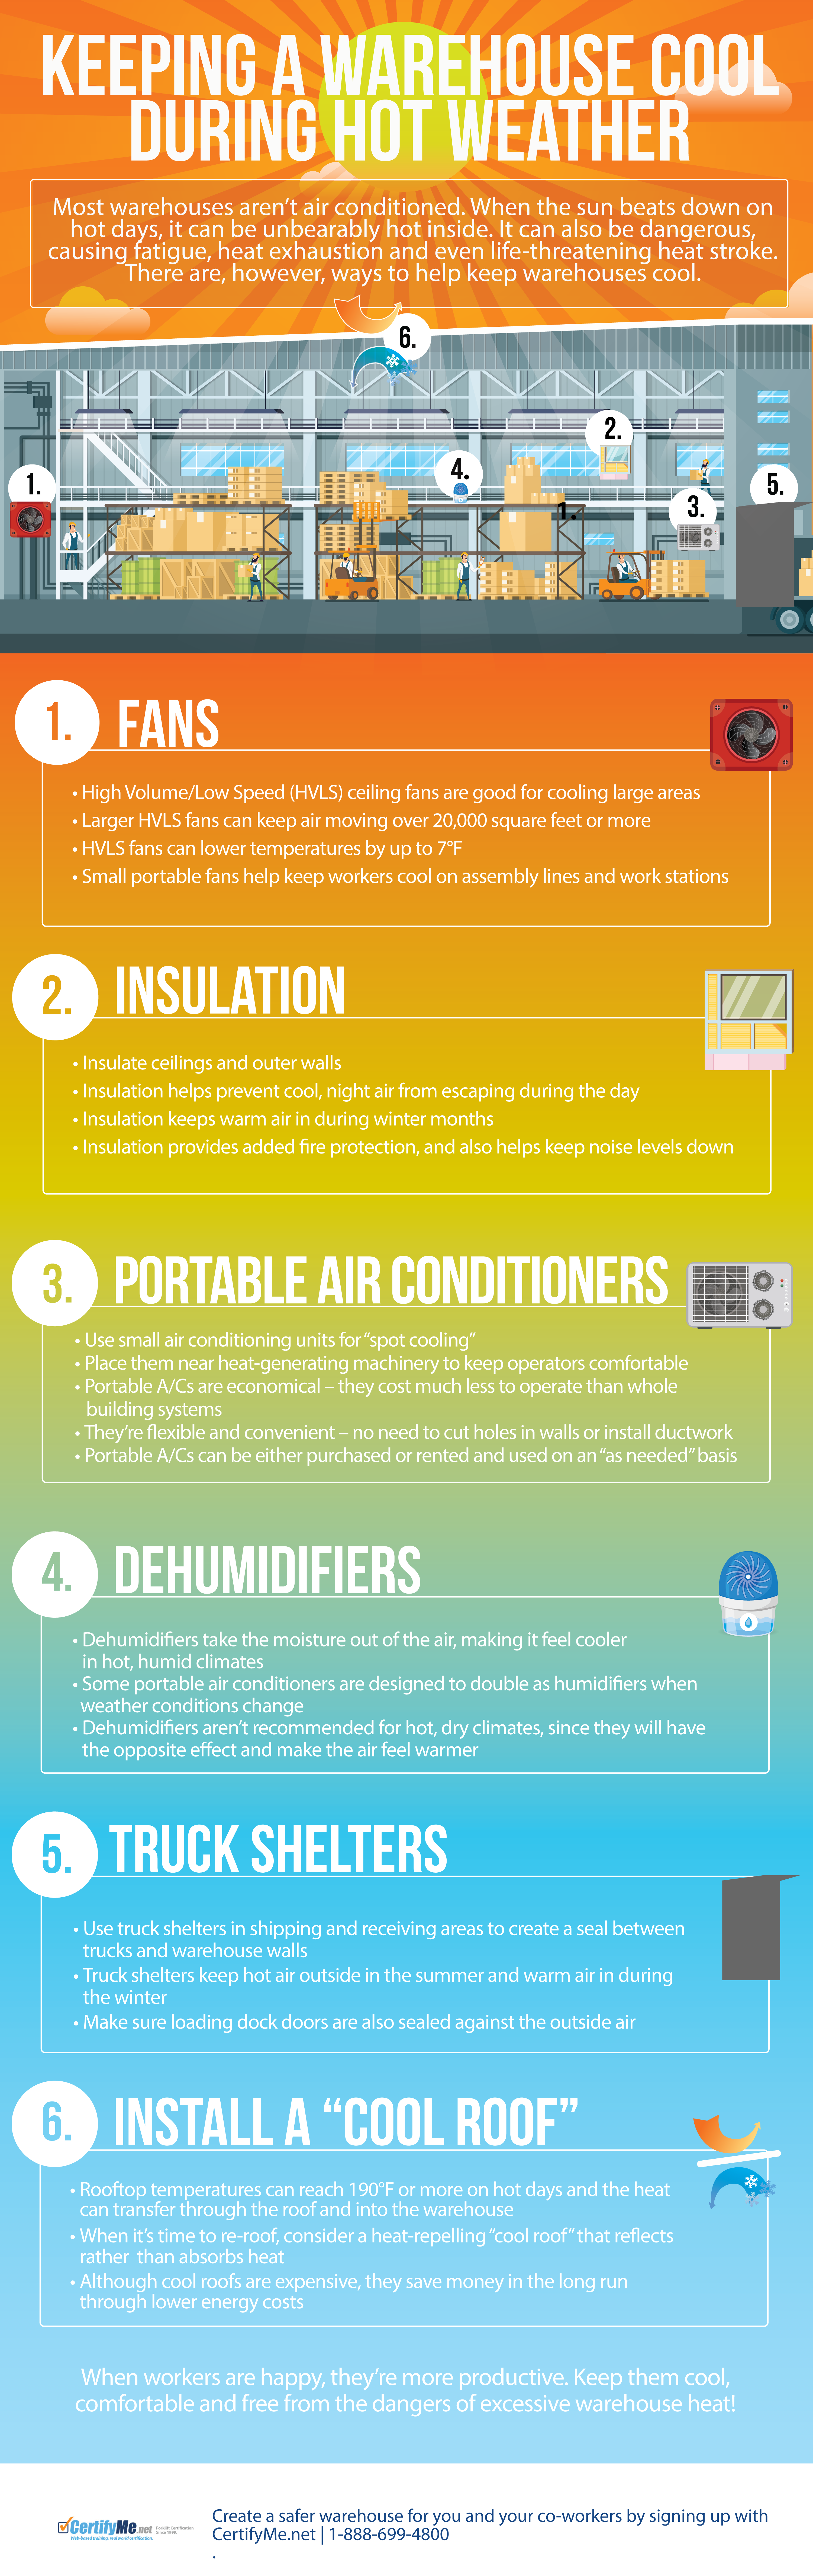 tips for keeping a warehouse cool in hot weather